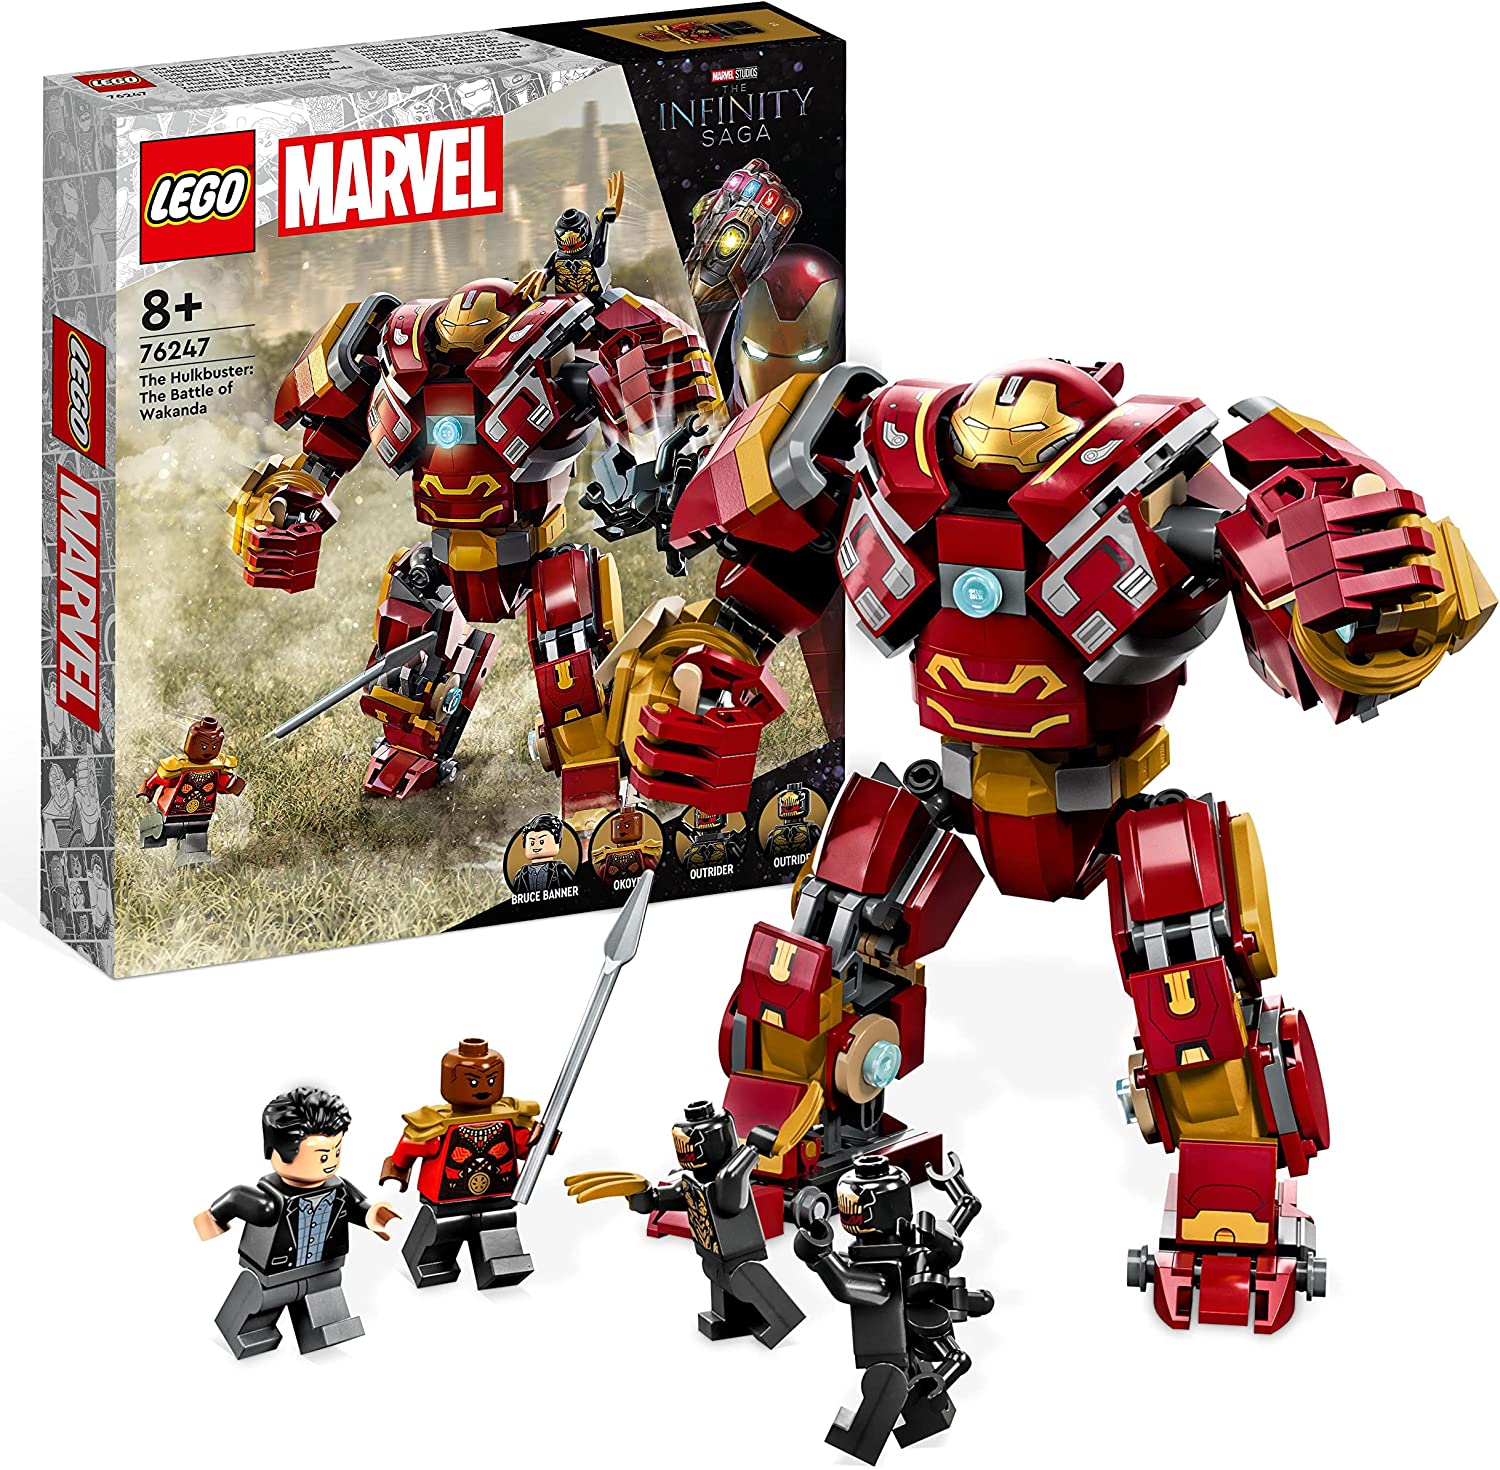 LEGO 76247 Marvel Hulkbuster: The Battle of Wakanda, Avengers Infinty War Toy with Bruce Banner Mini Figure, Action Figure for Children from 8 Years